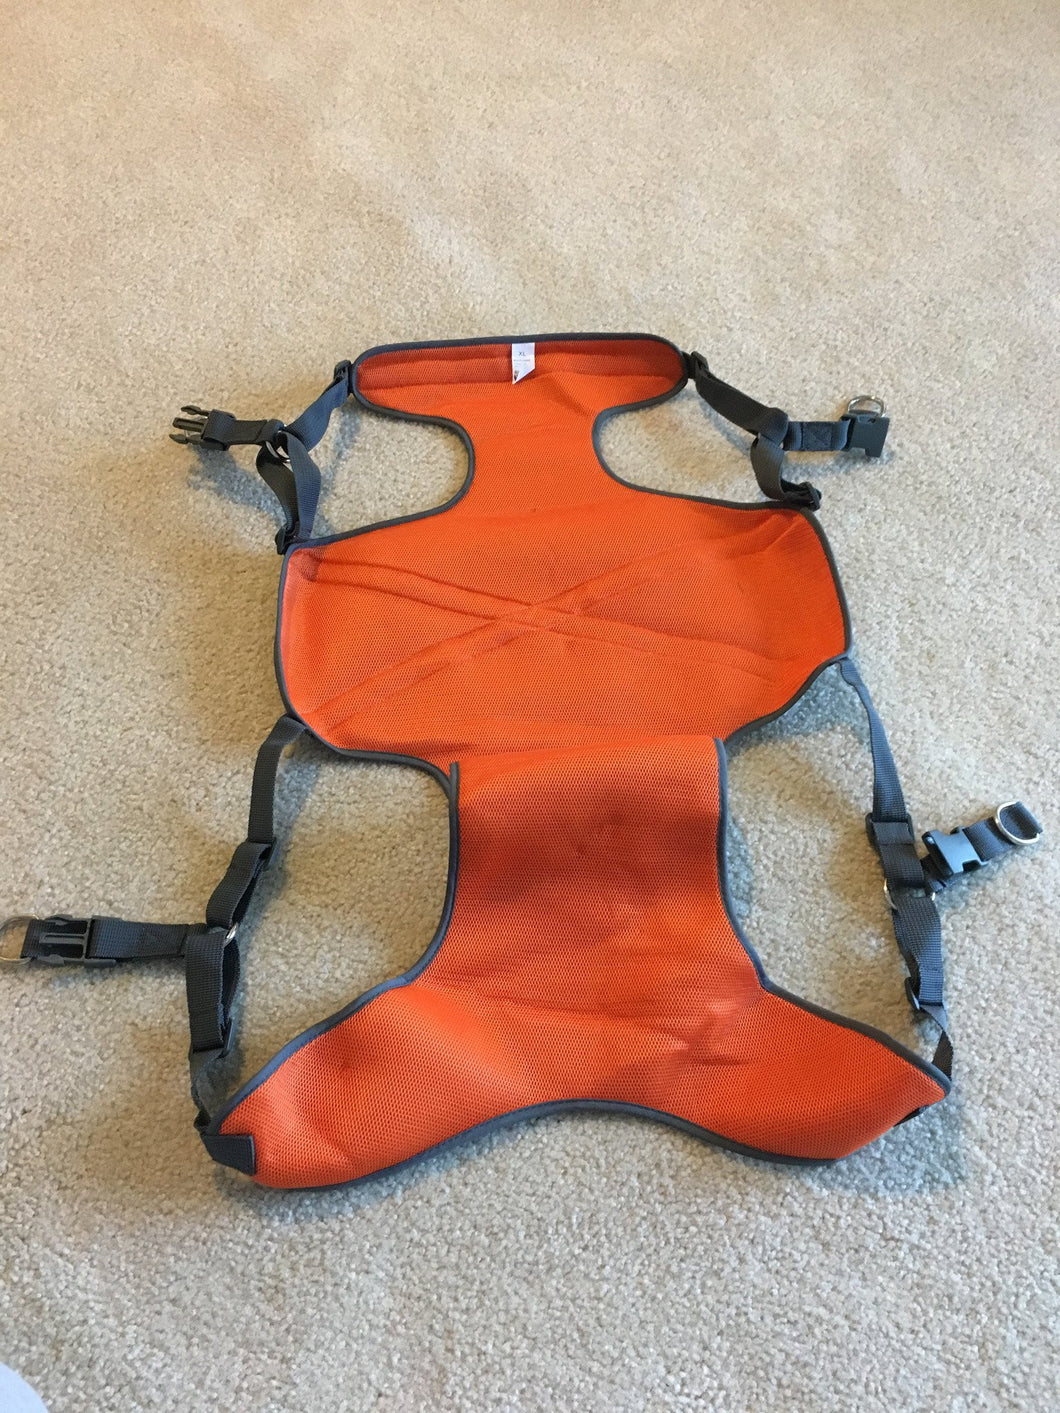 EXTRA LARGE HARNESS (71-120 lbs)